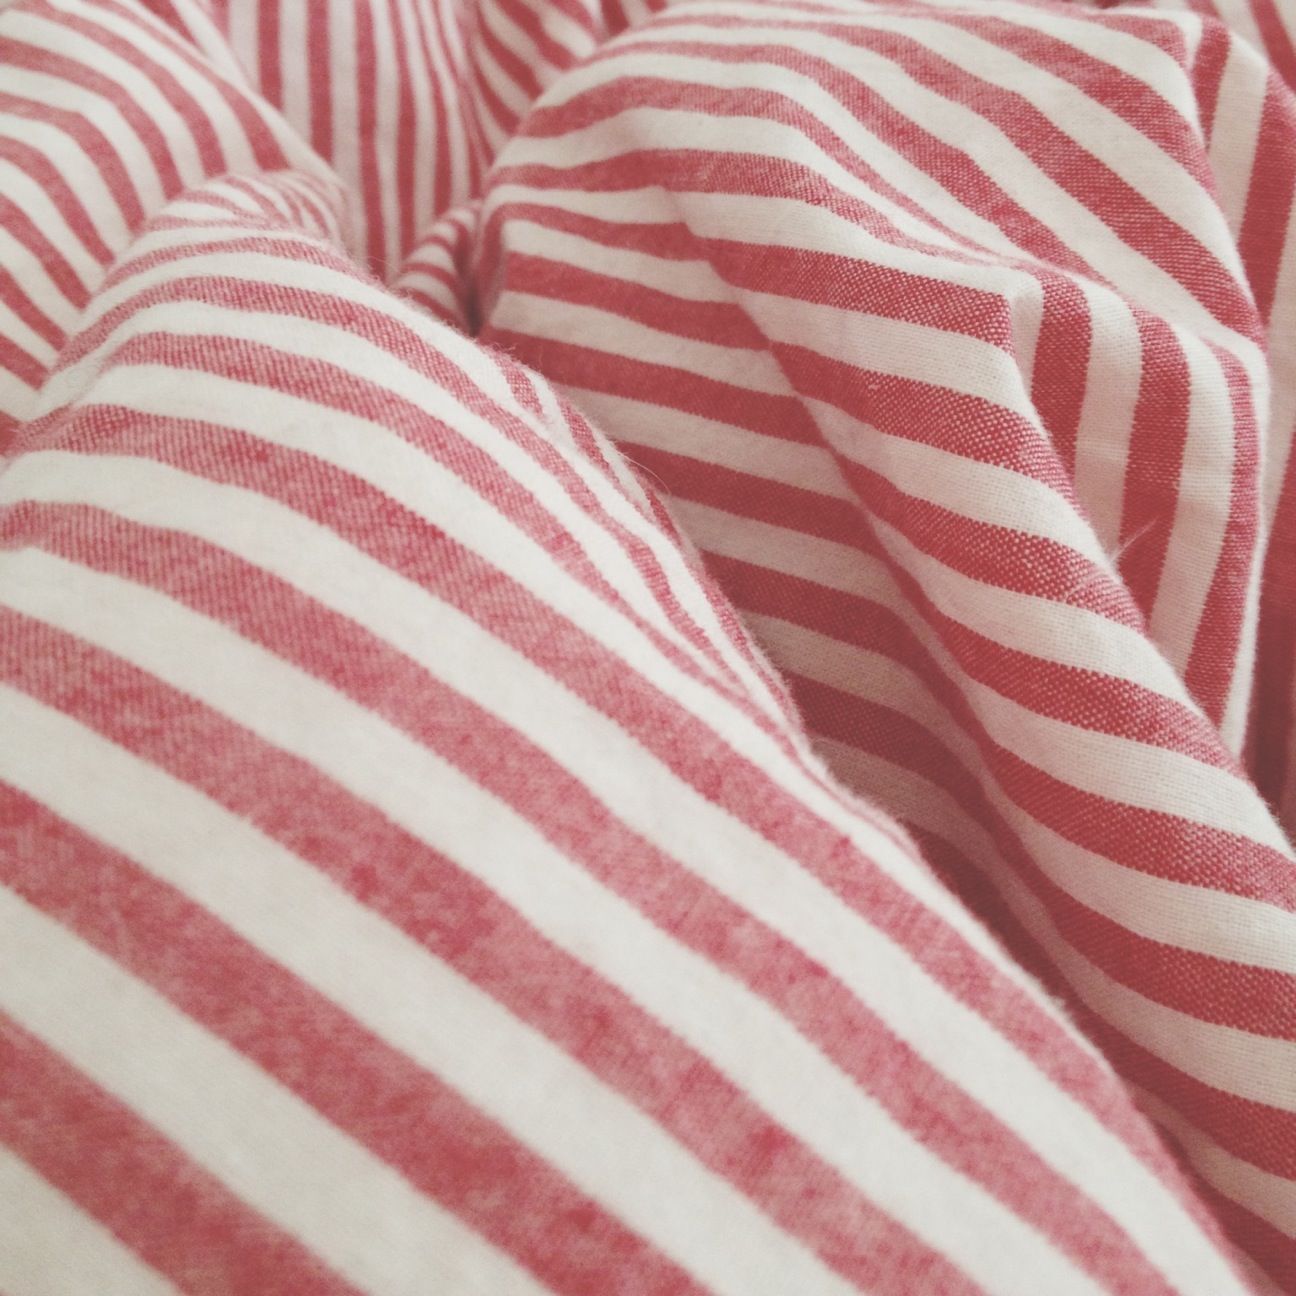 striped, red, full frame, backgrounds, pattern, white color, identity, textile, close-up, american flag, patriotism, fabric, design, multi colored, national flag, no people, flag, indoors, pride, textured